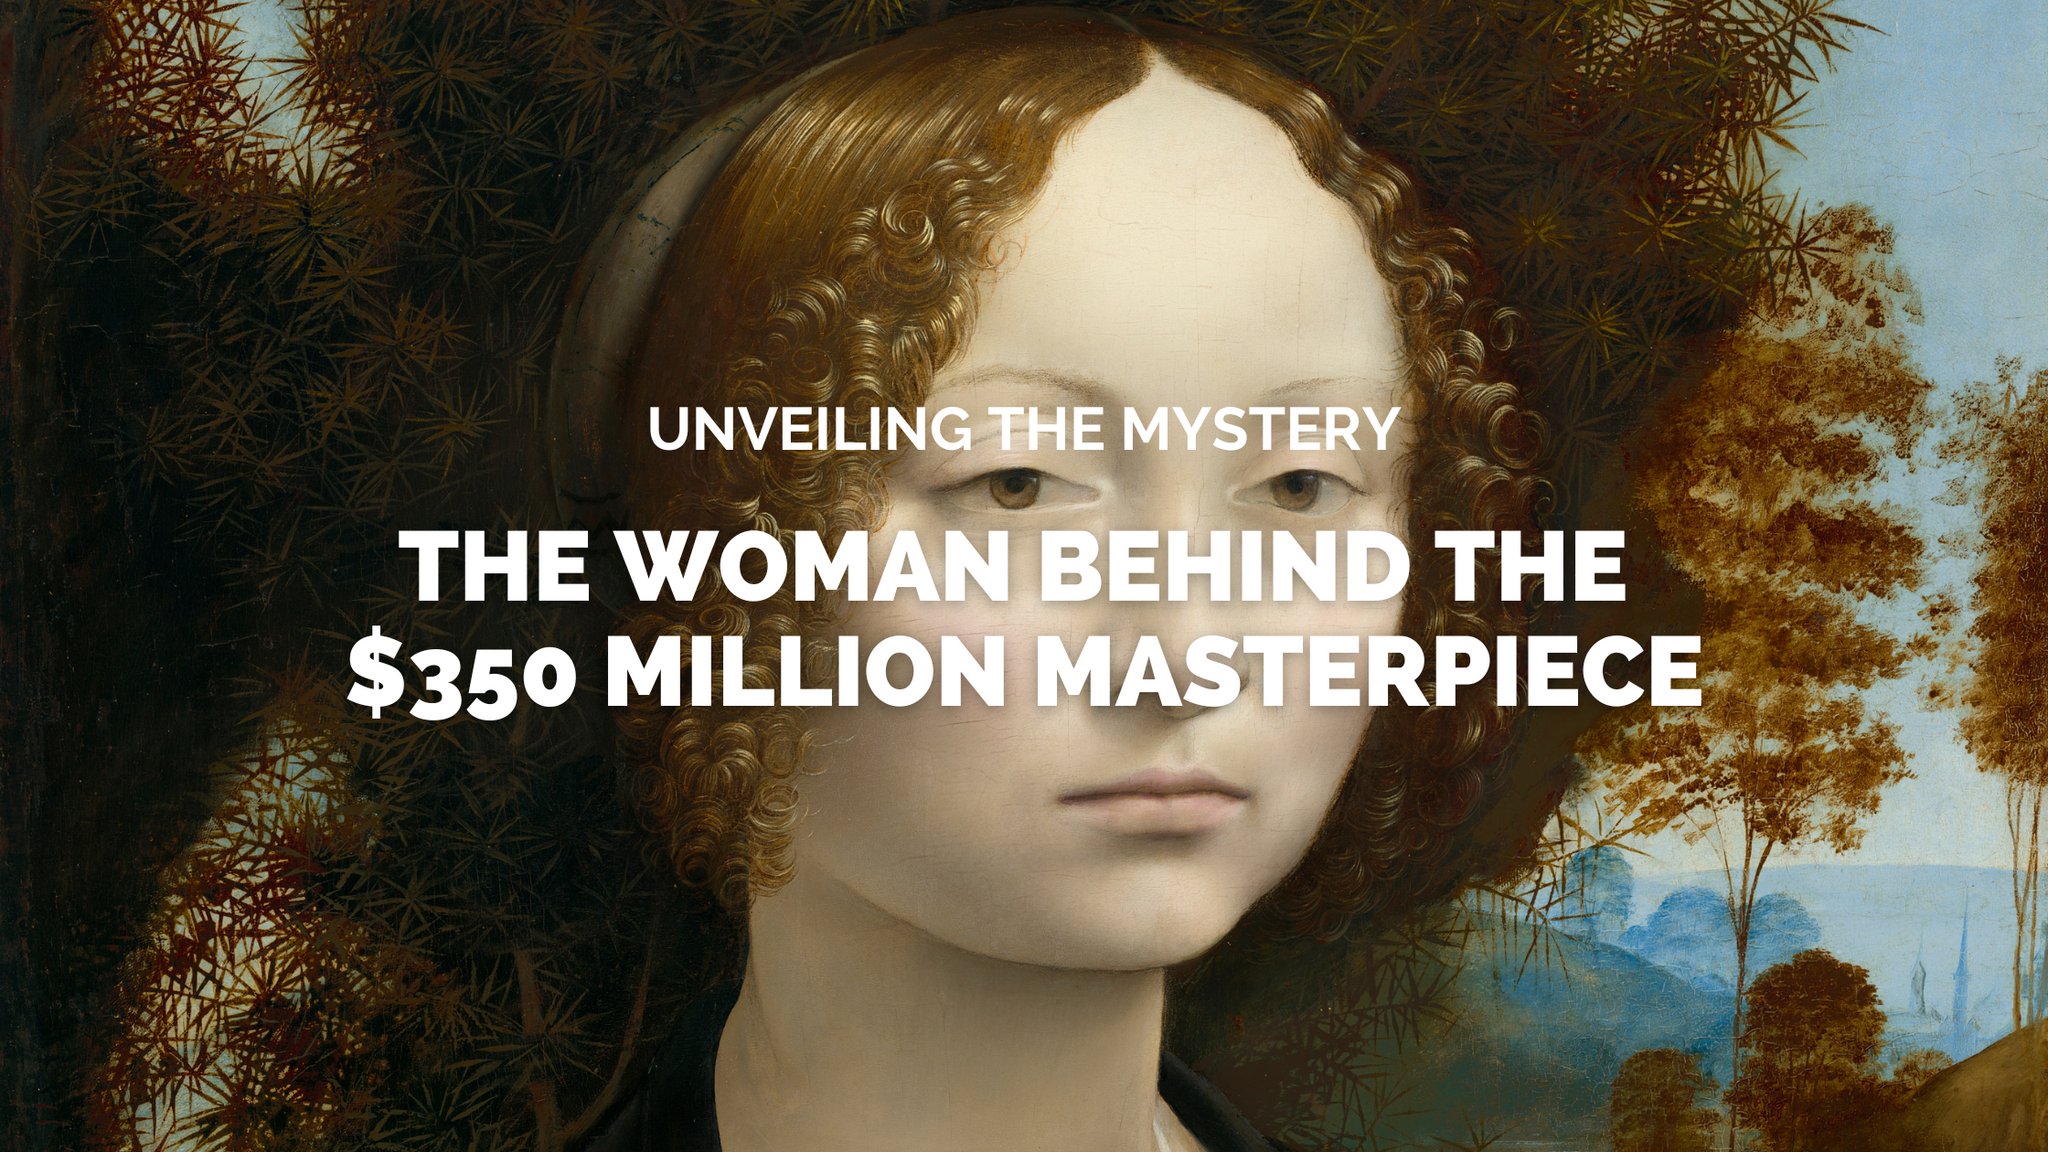 The Woman Behind the $350 Million Masterpiece